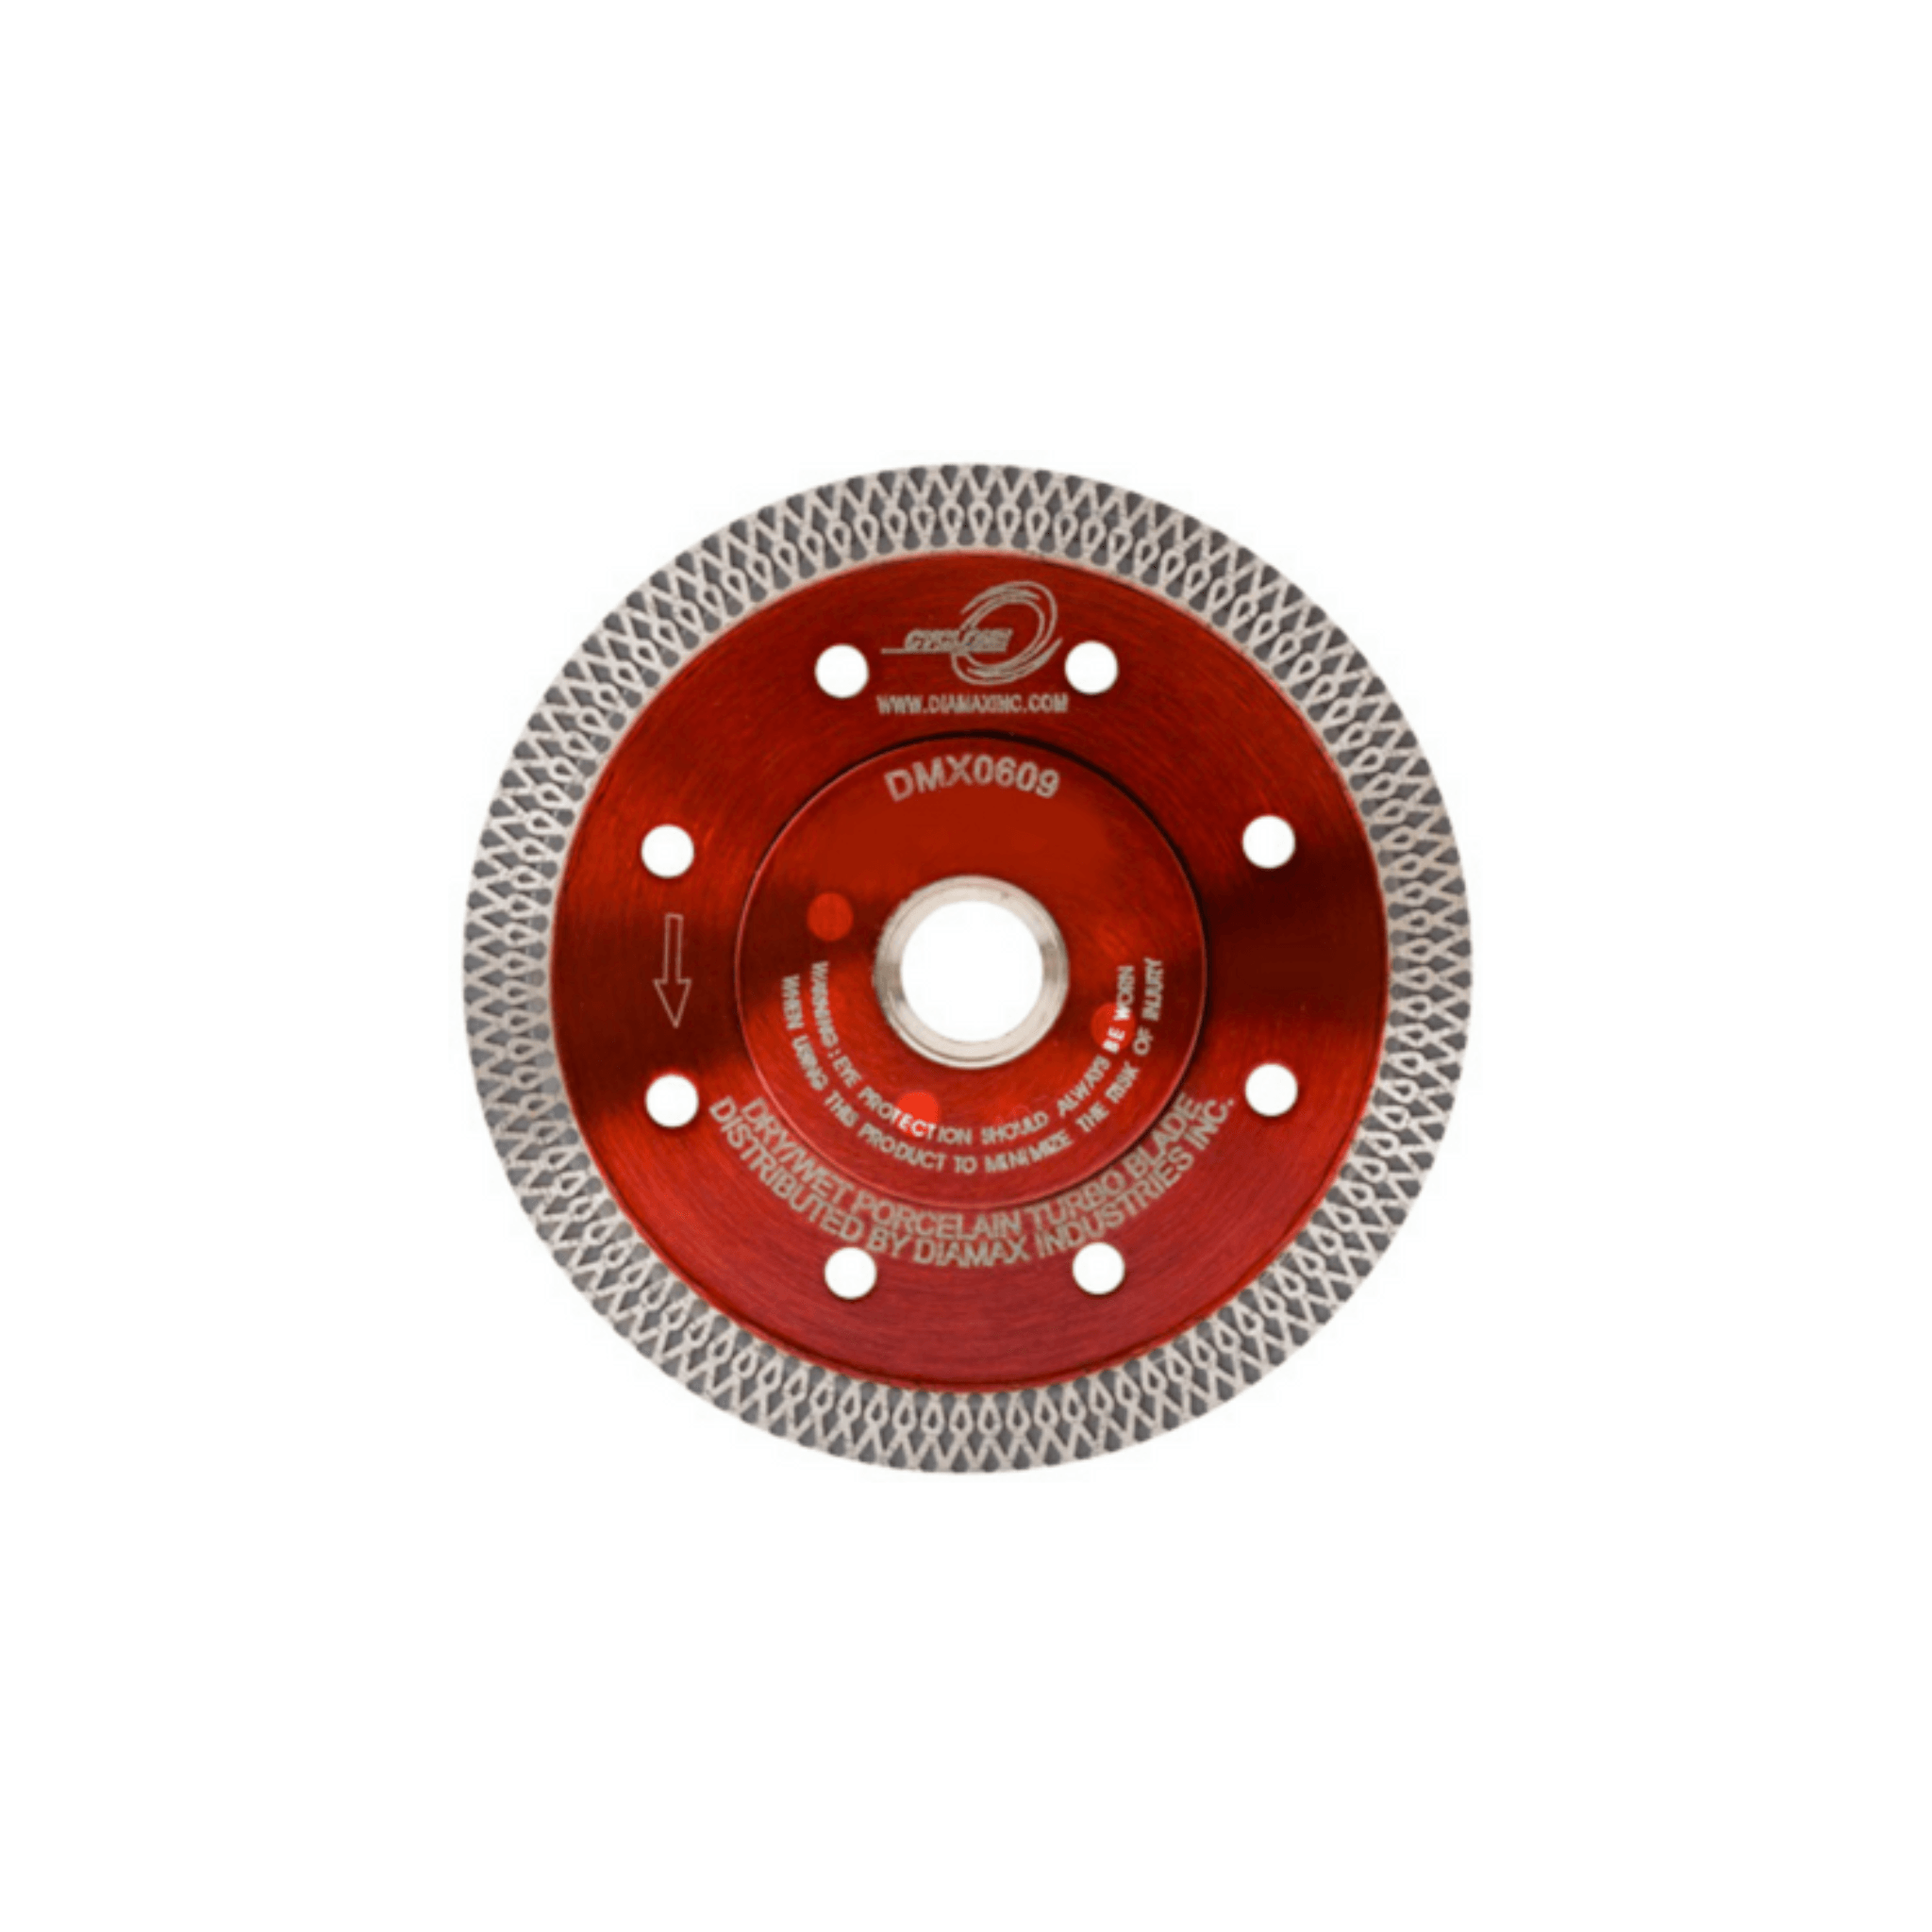 Cyclone Porcelain Turbo Blade 4" - Direct Stone Tool Supply, Inc